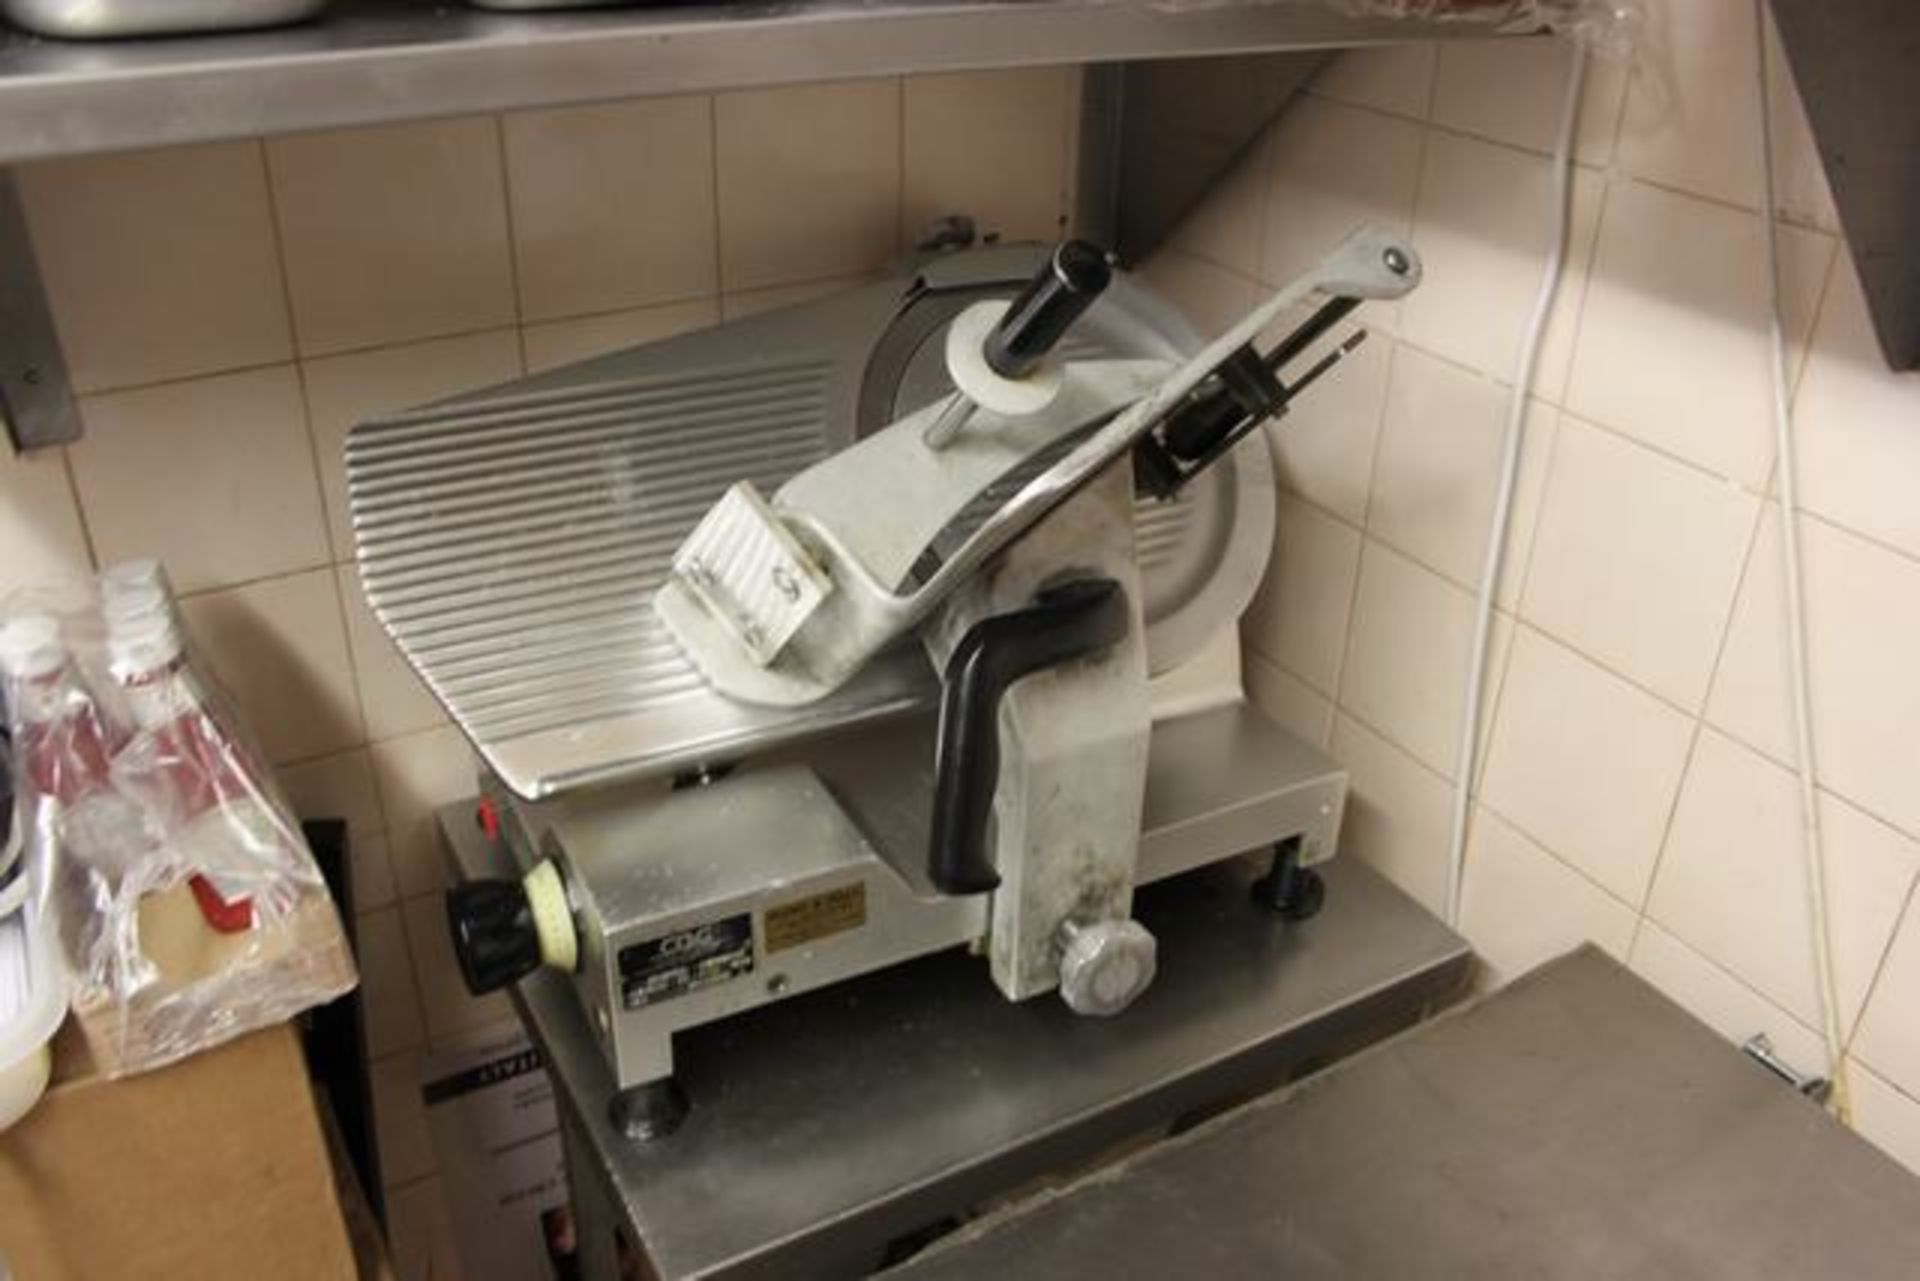 CEG 300 I table top gravity feed slicer 300mm blade 1.35 HP motor 325mm carriage stroke